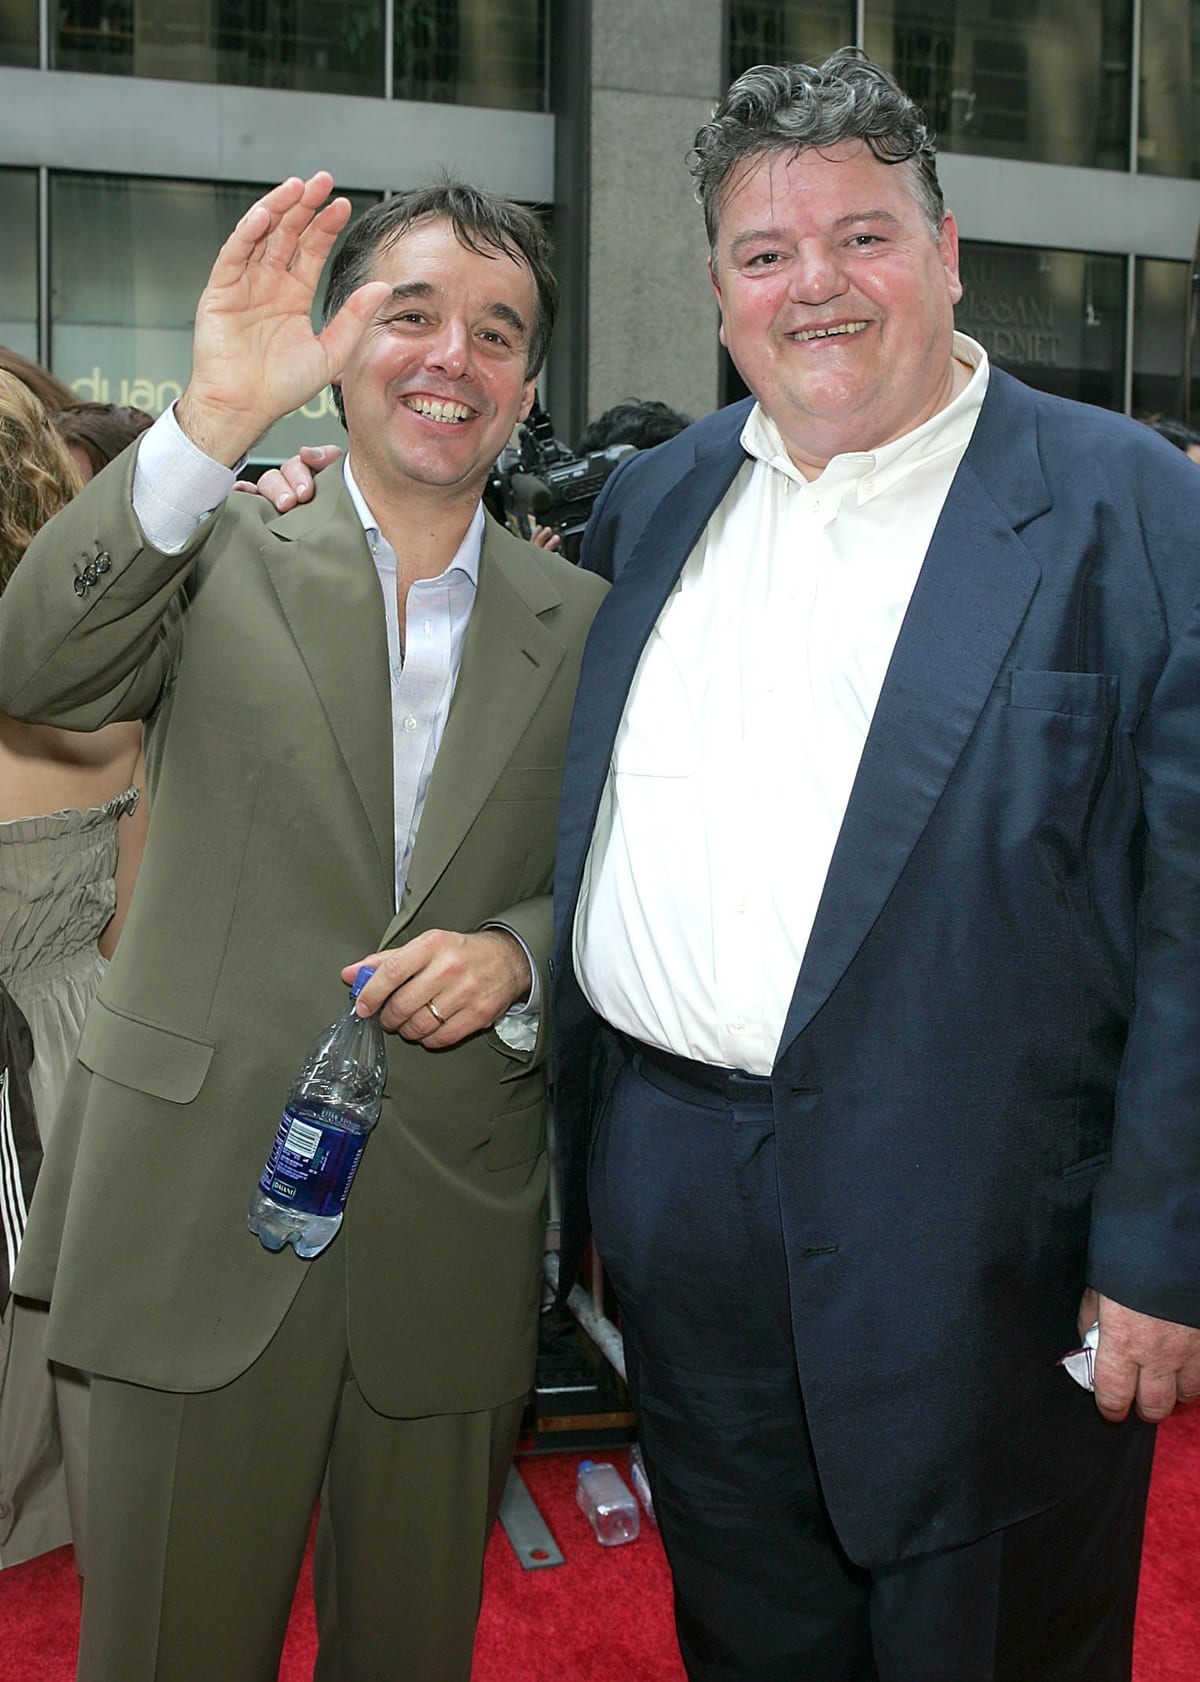 Chris Columbus and Robbie Coltrane at the premiere of "Harry Potter and The Prisoner of Azkaban"